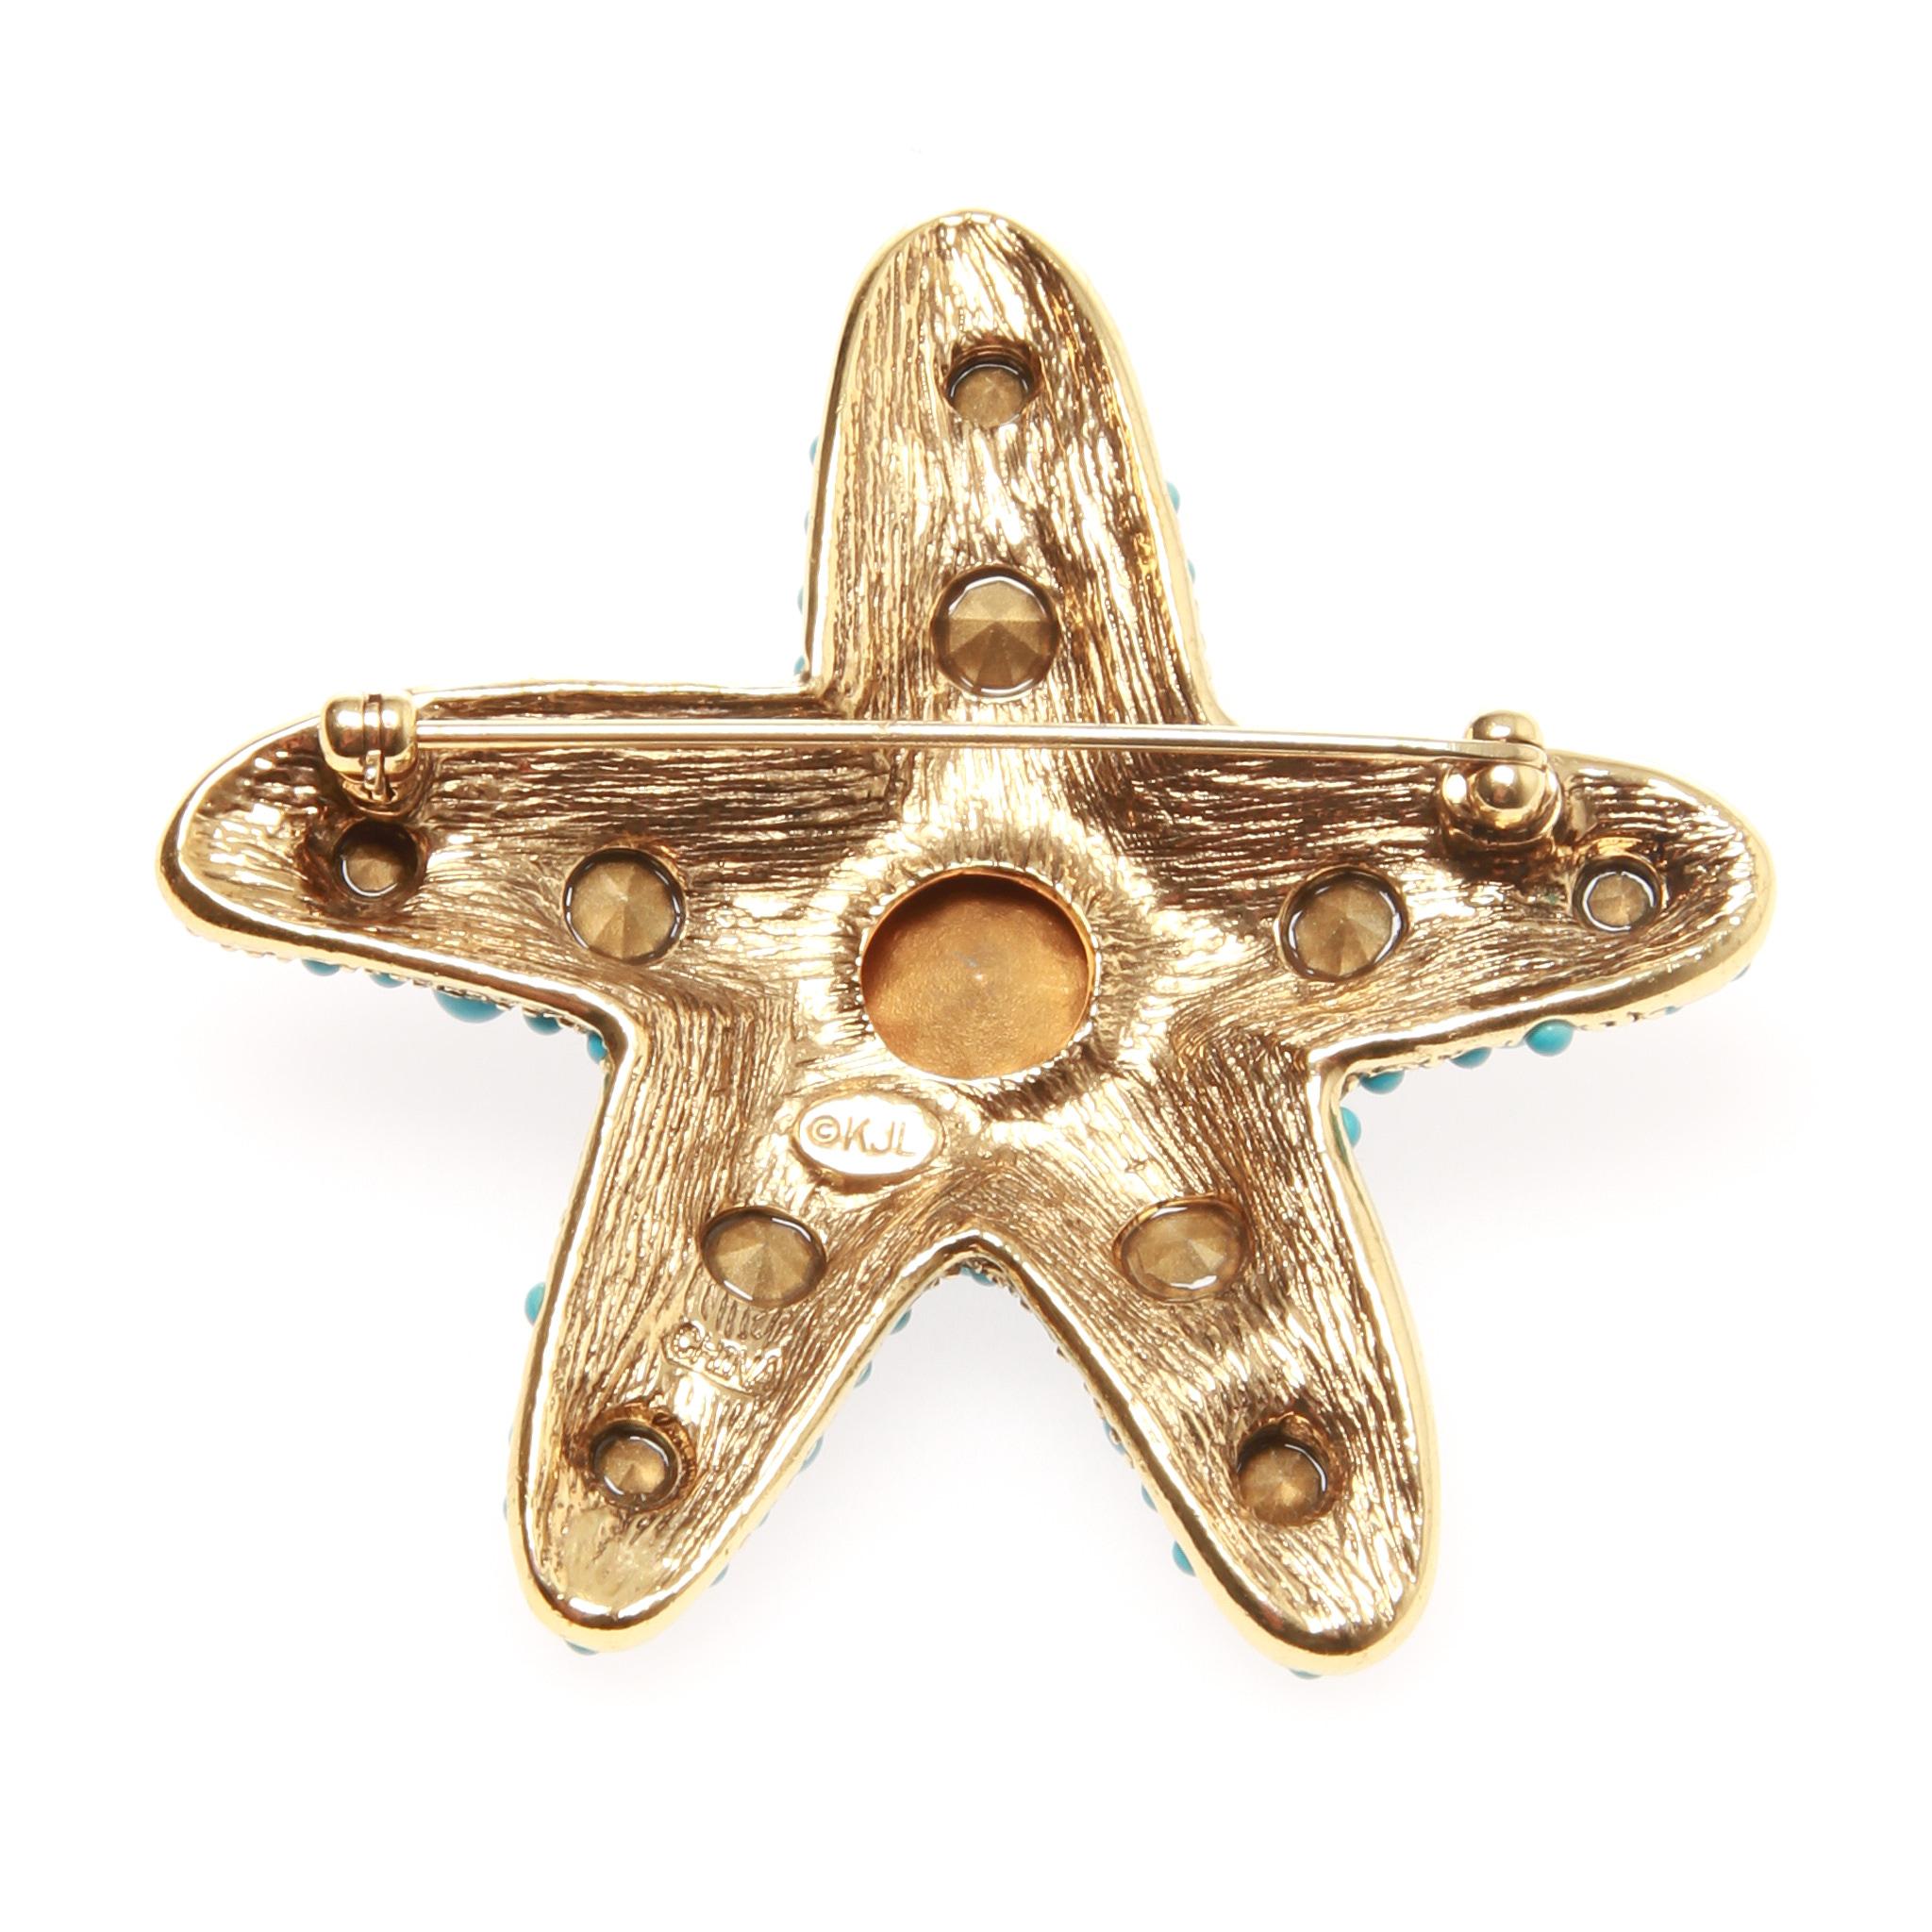 Kenneth Jay Lane Turquoise Starfish Brooch

Charming pin made of metal with turquoise and blue stones inset.
Pin is exceptionally crafted as are all Kenneth Jay Lane pieces.
The reverse has wonderful texture and the KJL signature, one of a kind and